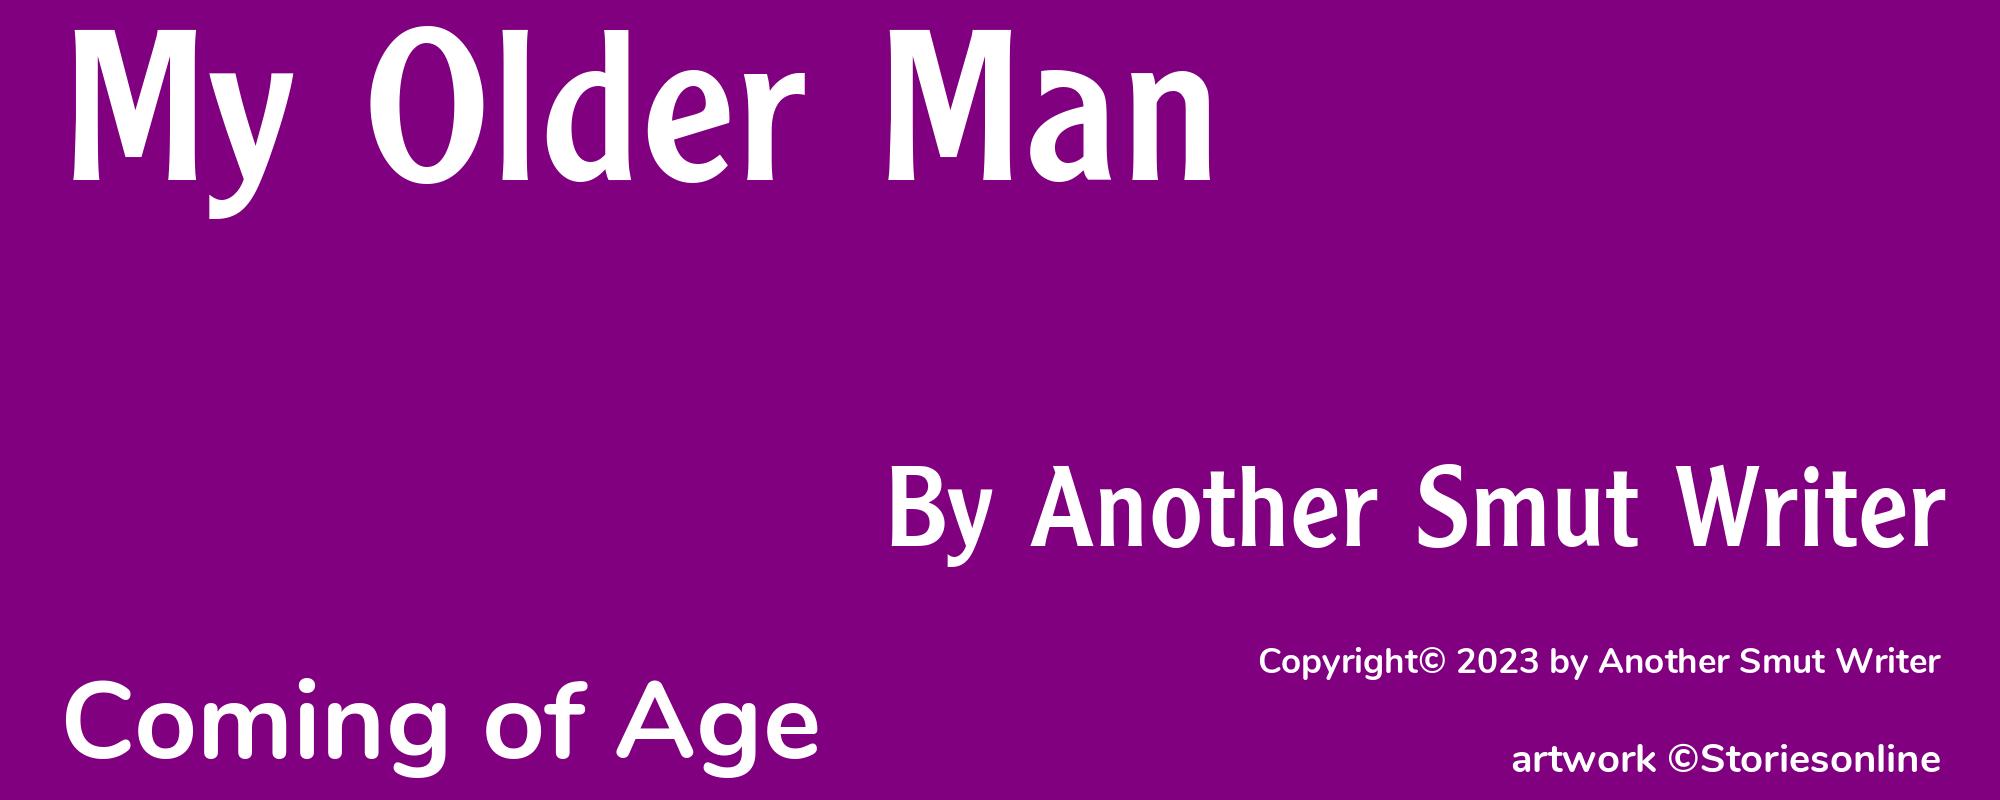 My Older Man - Cover